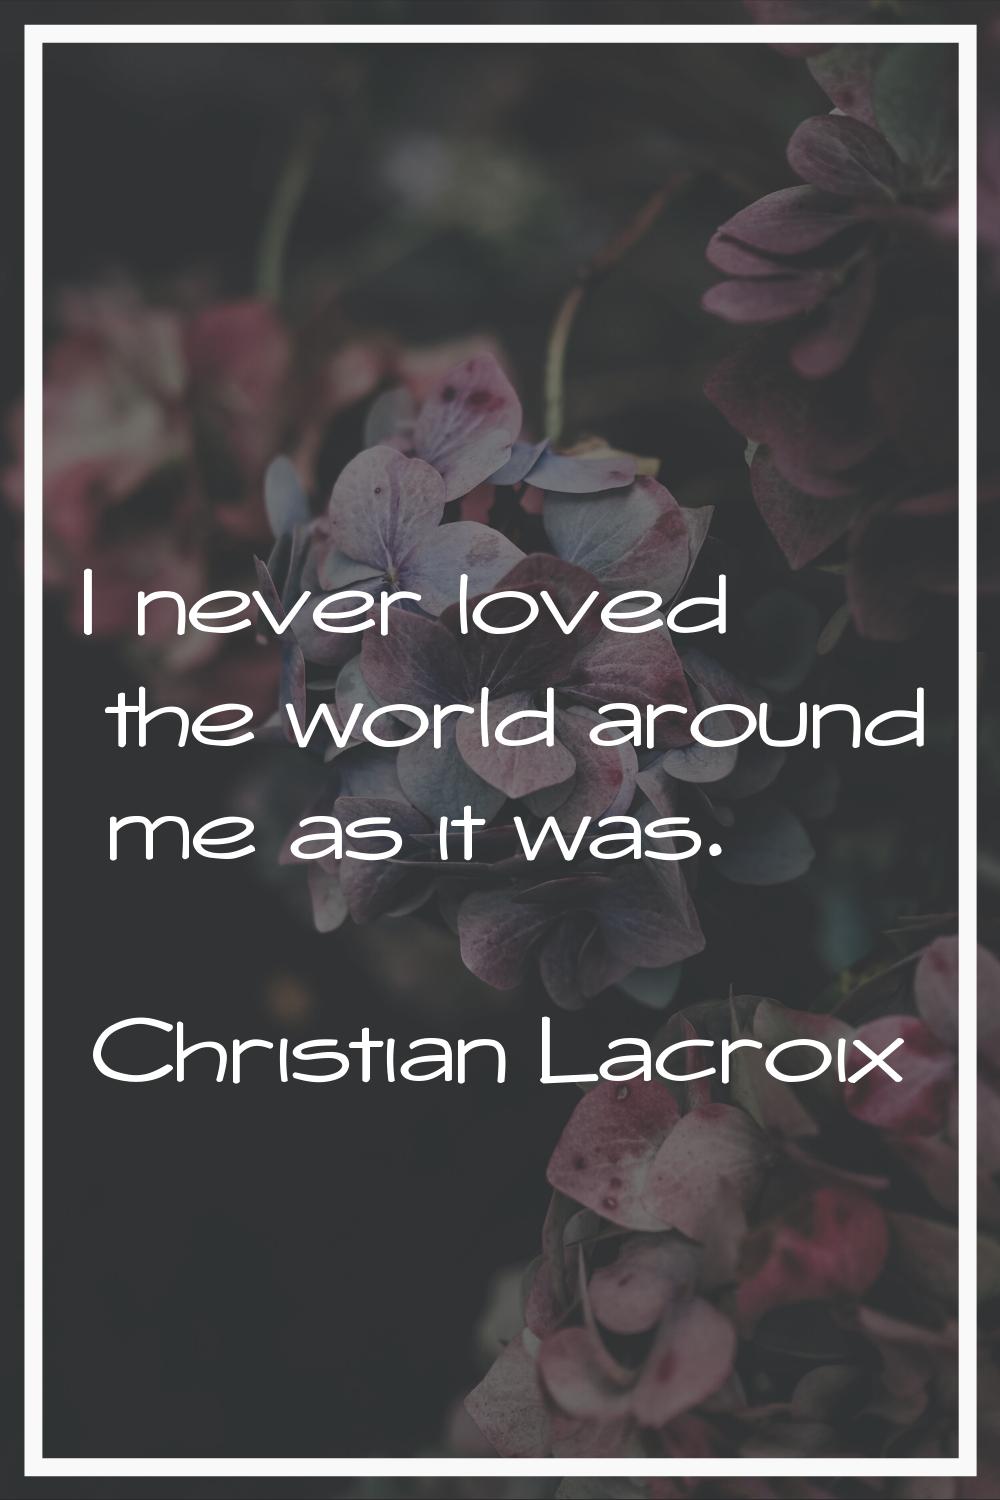 I never loved the world around me as it was.